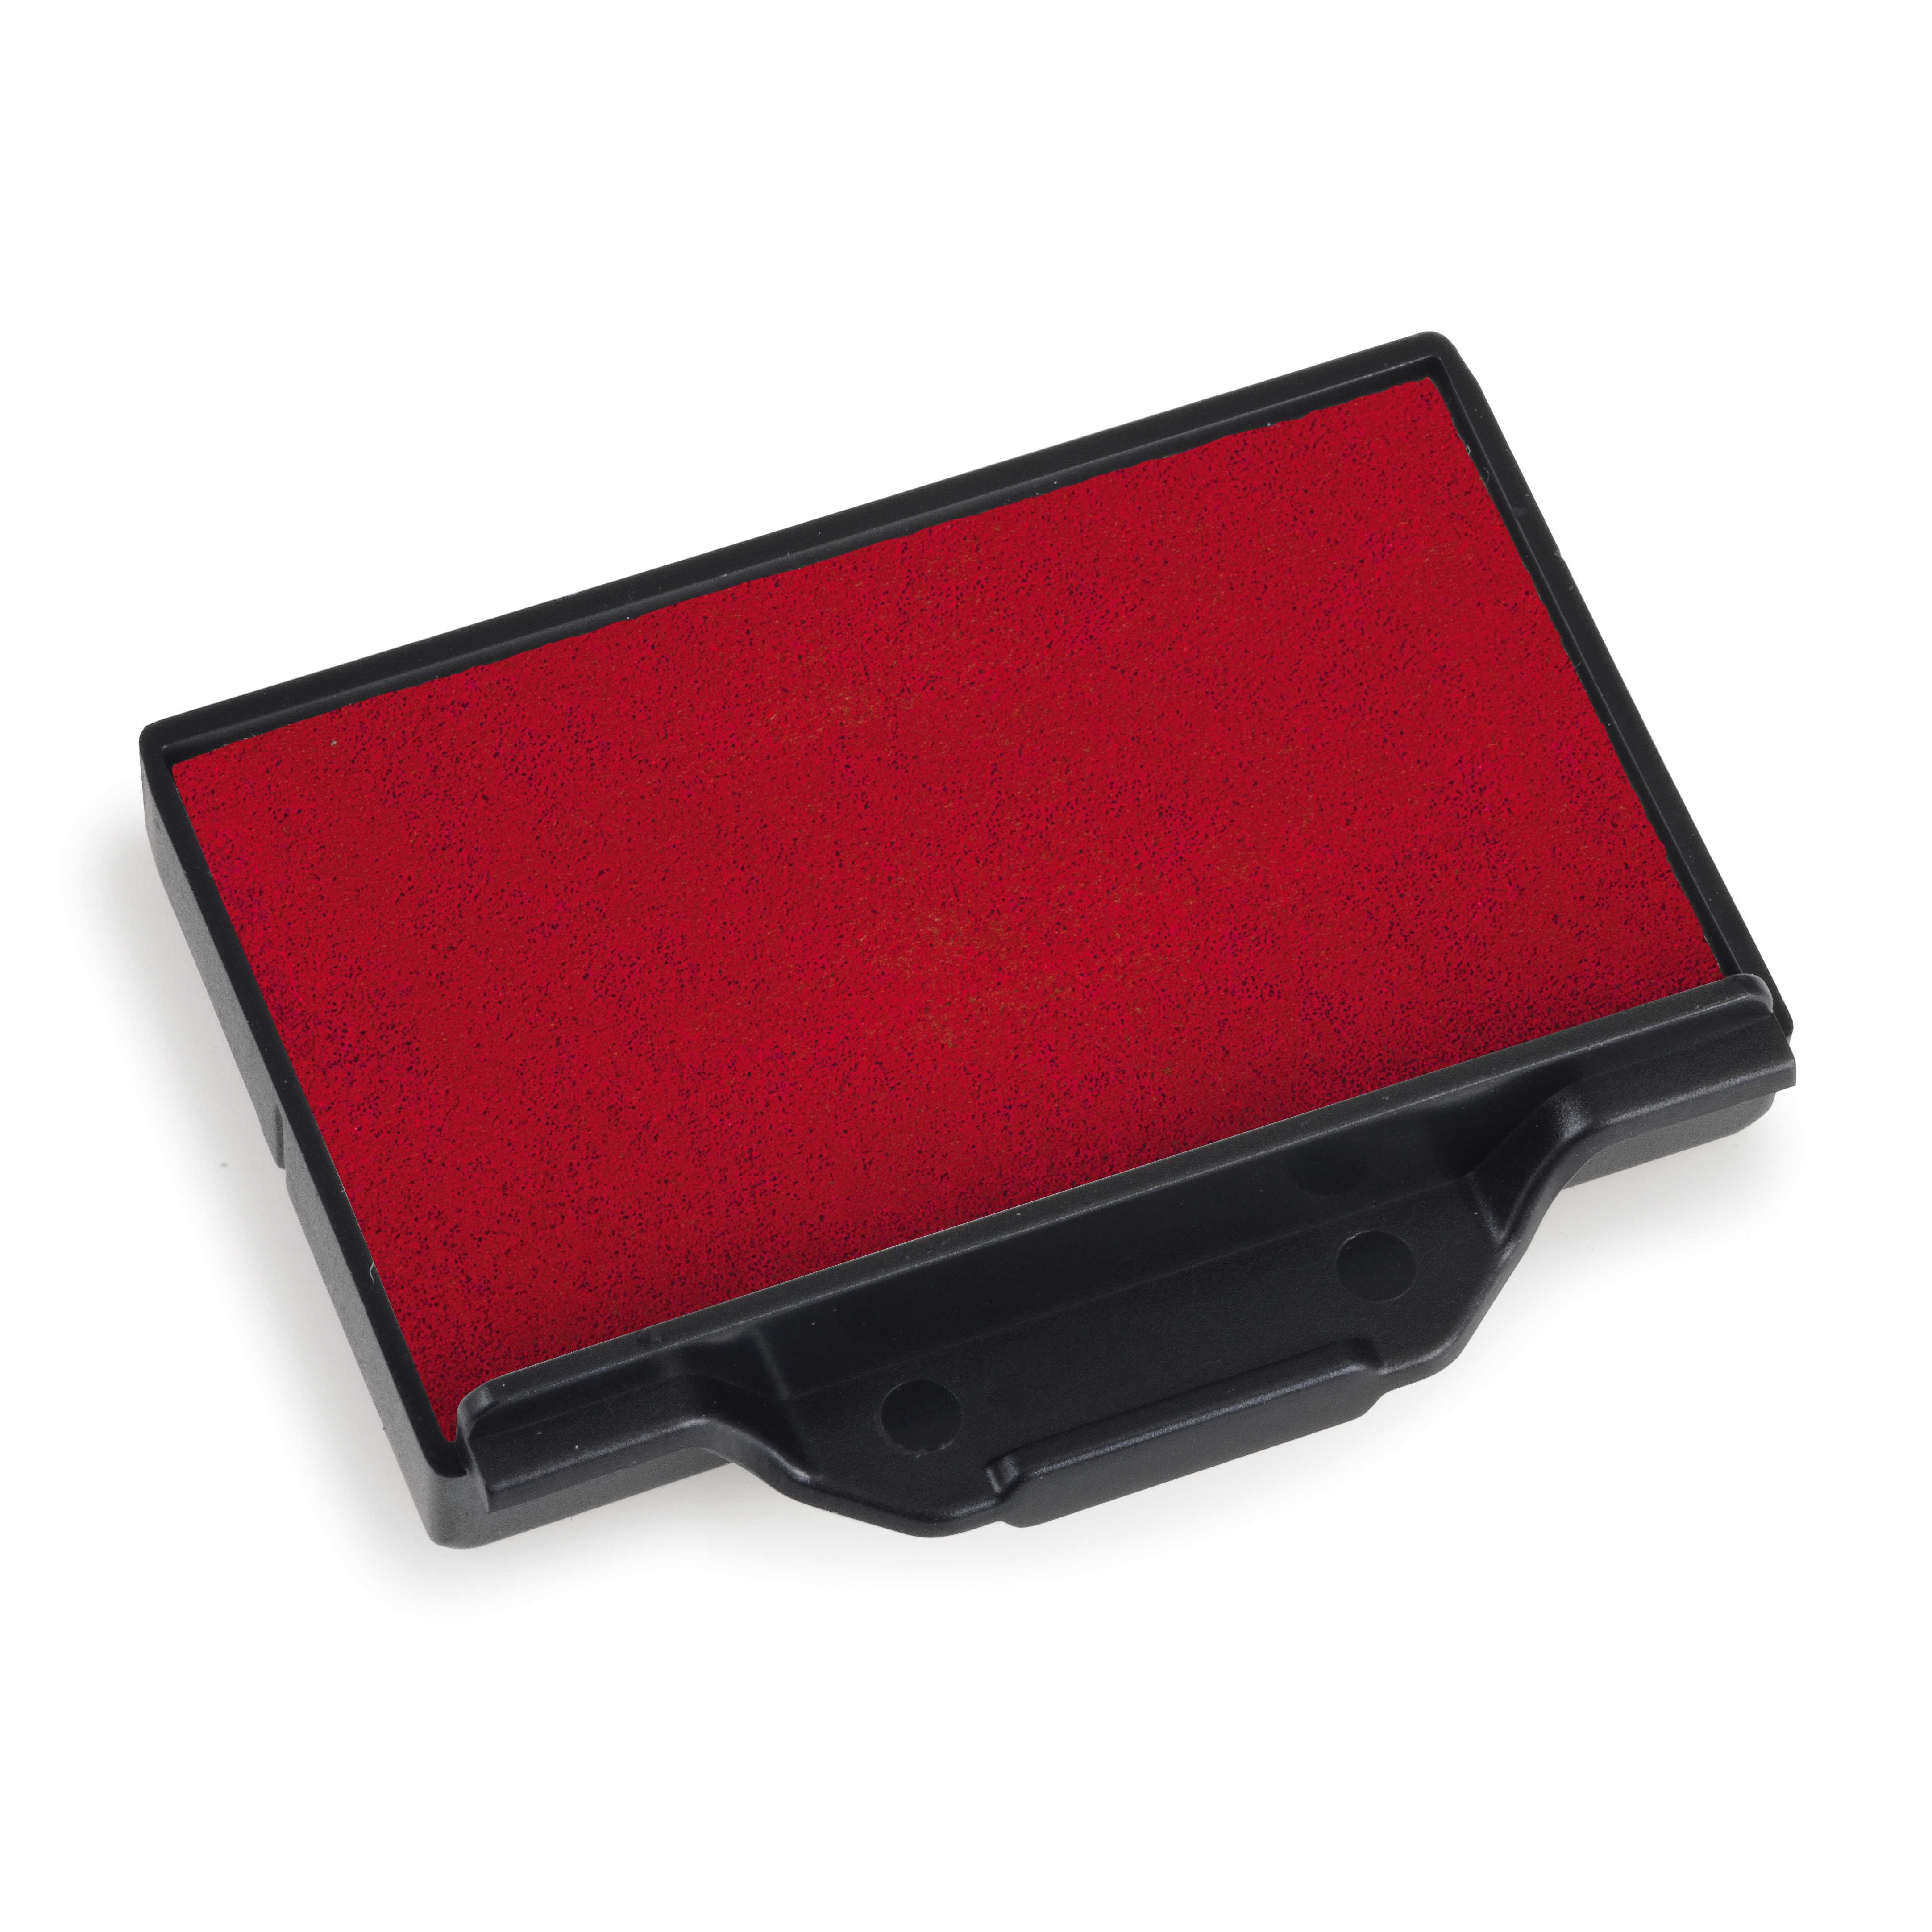 Replacement Pad for Trodat 5203 Self Inking Stamp - Red Ink Color